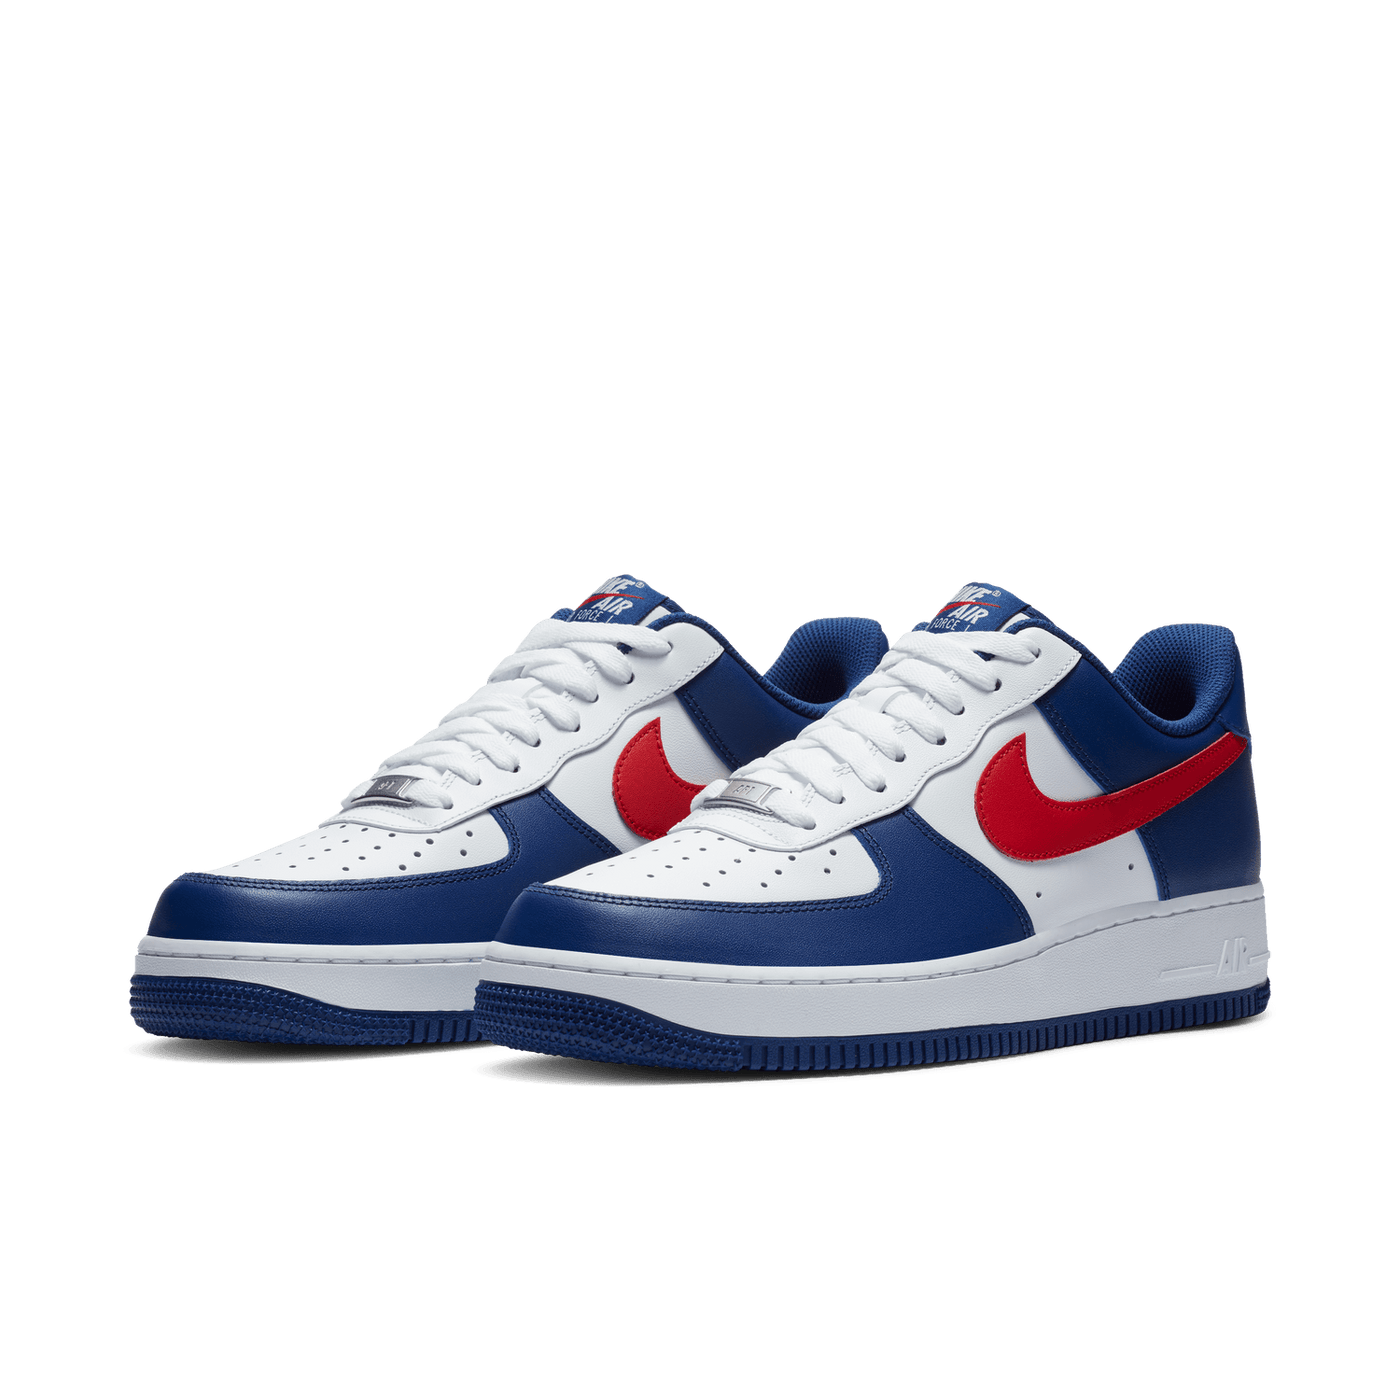 MENS NIKE AIR FORCE 1 '07 "INDEPENDENCE DAY" (MEN'S)